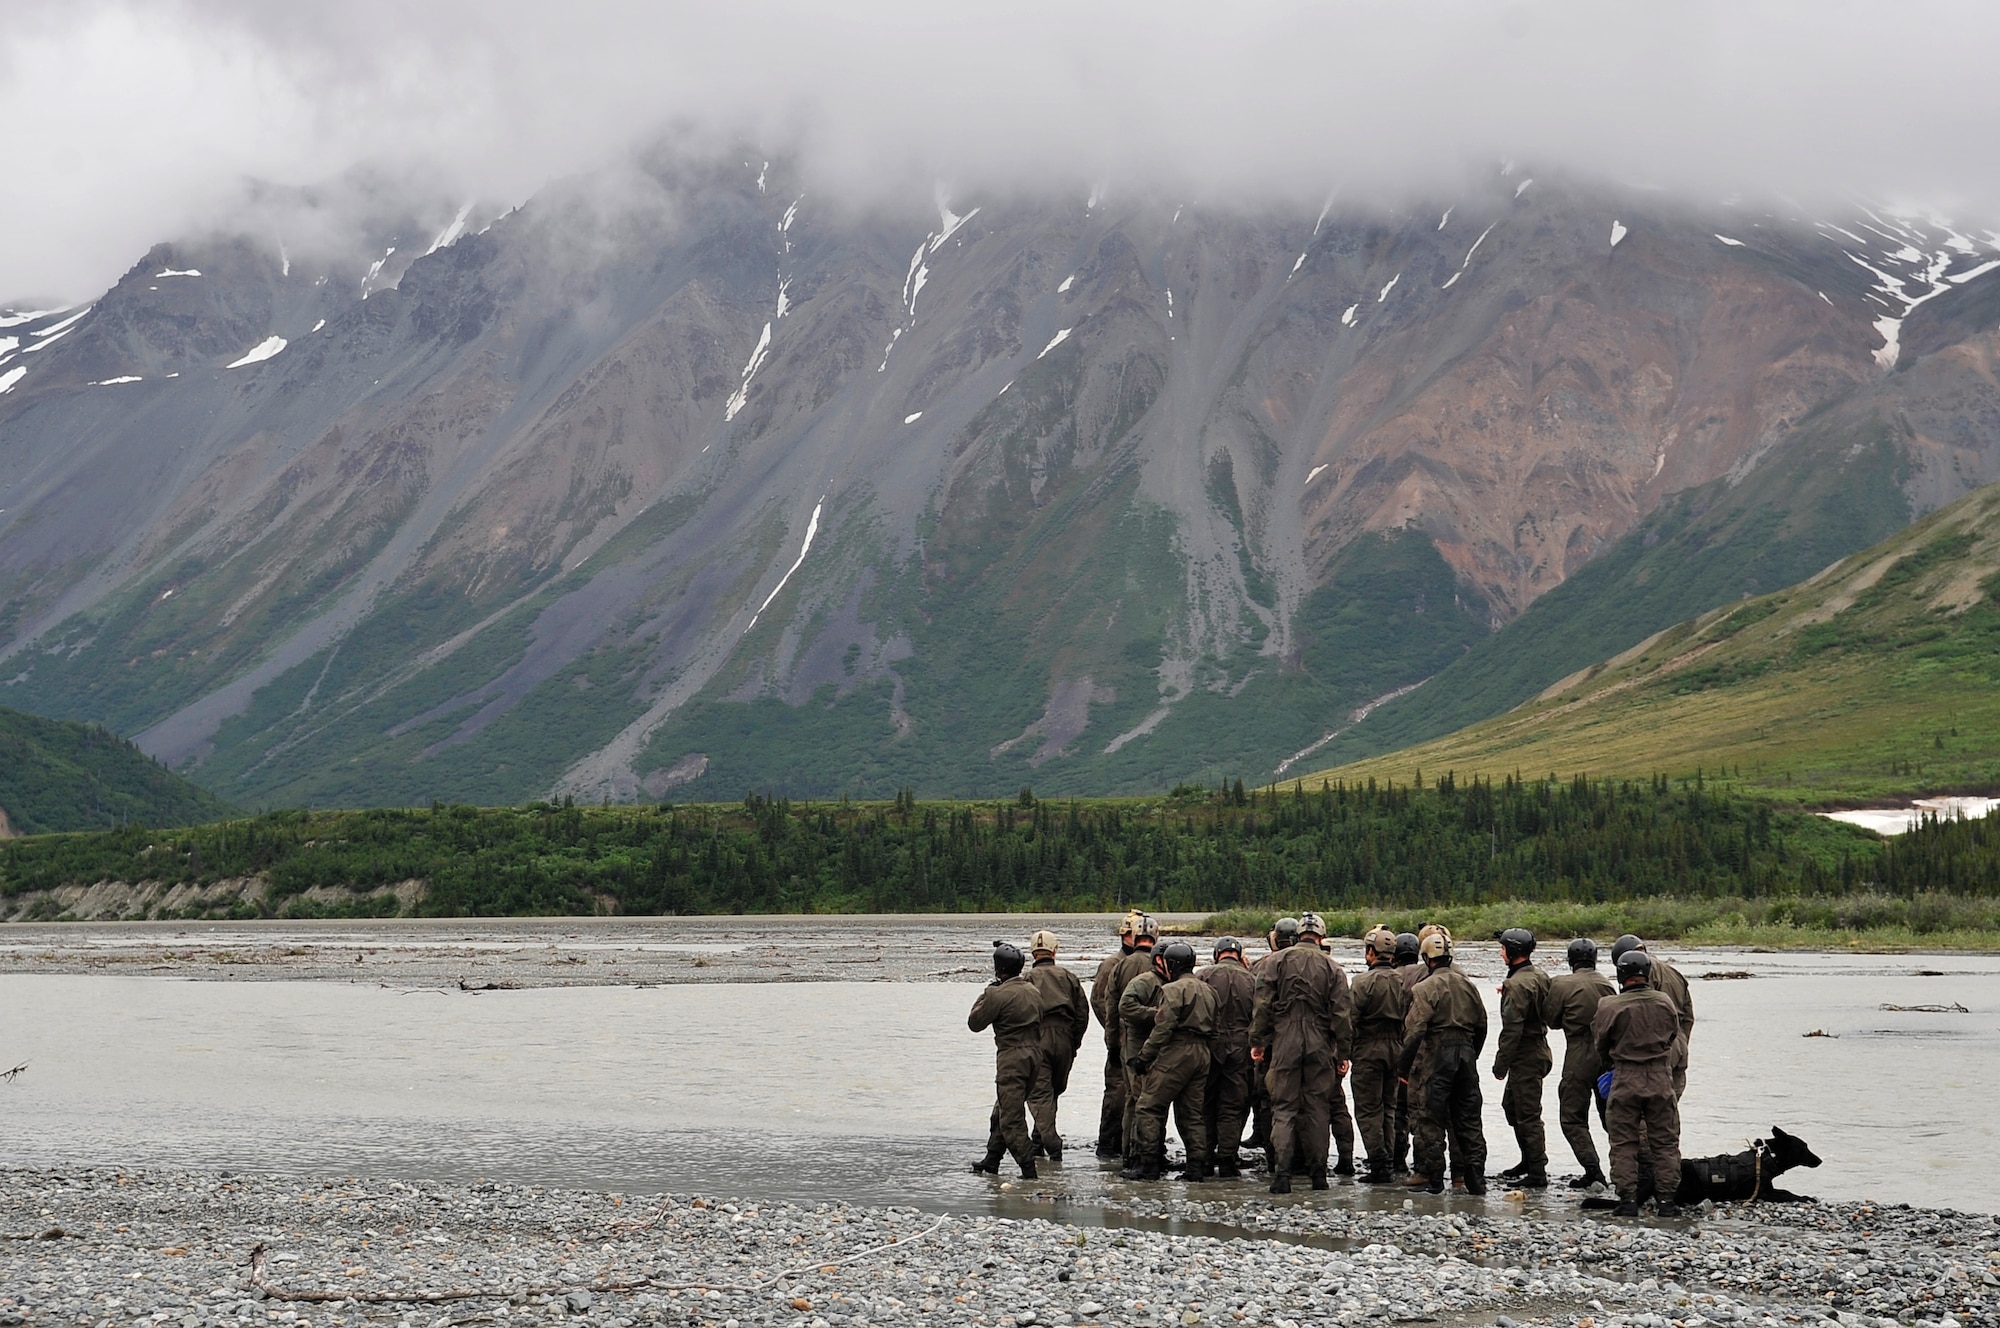 A group of Navy SEALs prepares to cross Phelan Creek during NORTHERN EDGE 2009, June 17. NE09 is a large scale exercise hosted in Alaska to improve command, control and communications between the Armed Services. The Northern Warfare Training Center and the SEALs worked together on river crossing techniques and rope handling. (U.S. Air Force photo/Staff Sgt. Christopher Boitz)